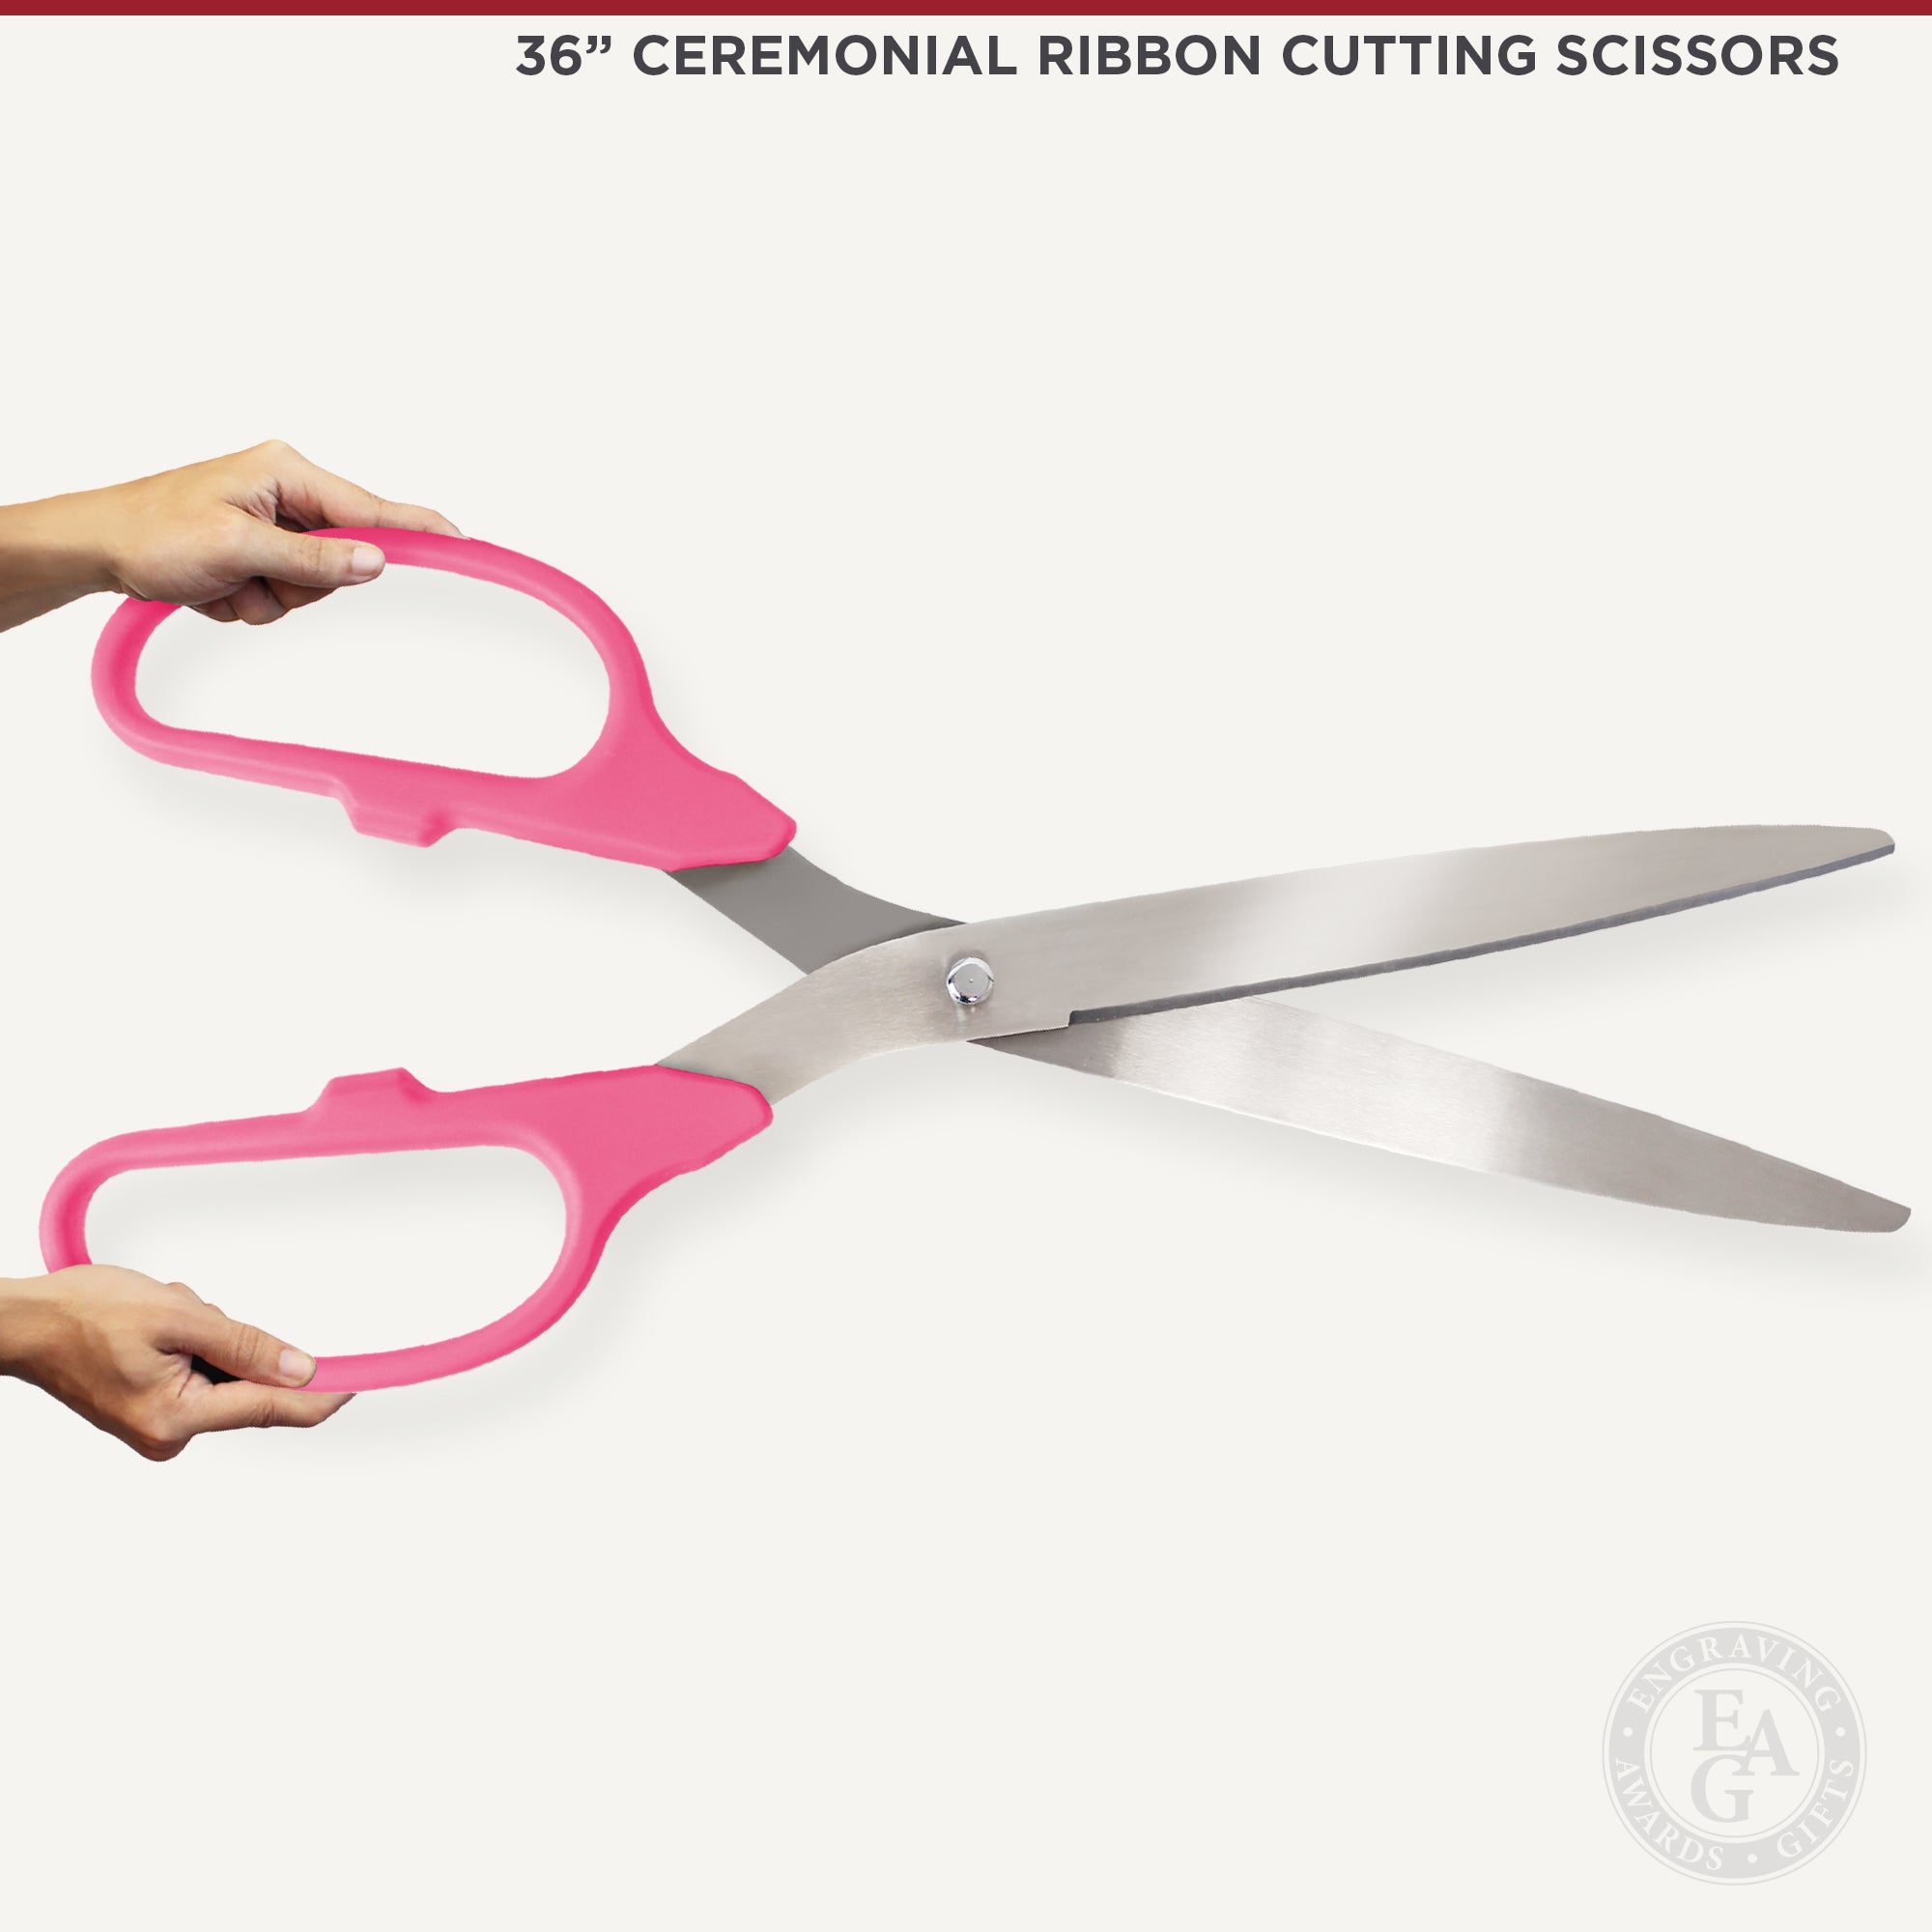 Giant Scissors they Actually Cut Any Color. Giant Scissors 26 for